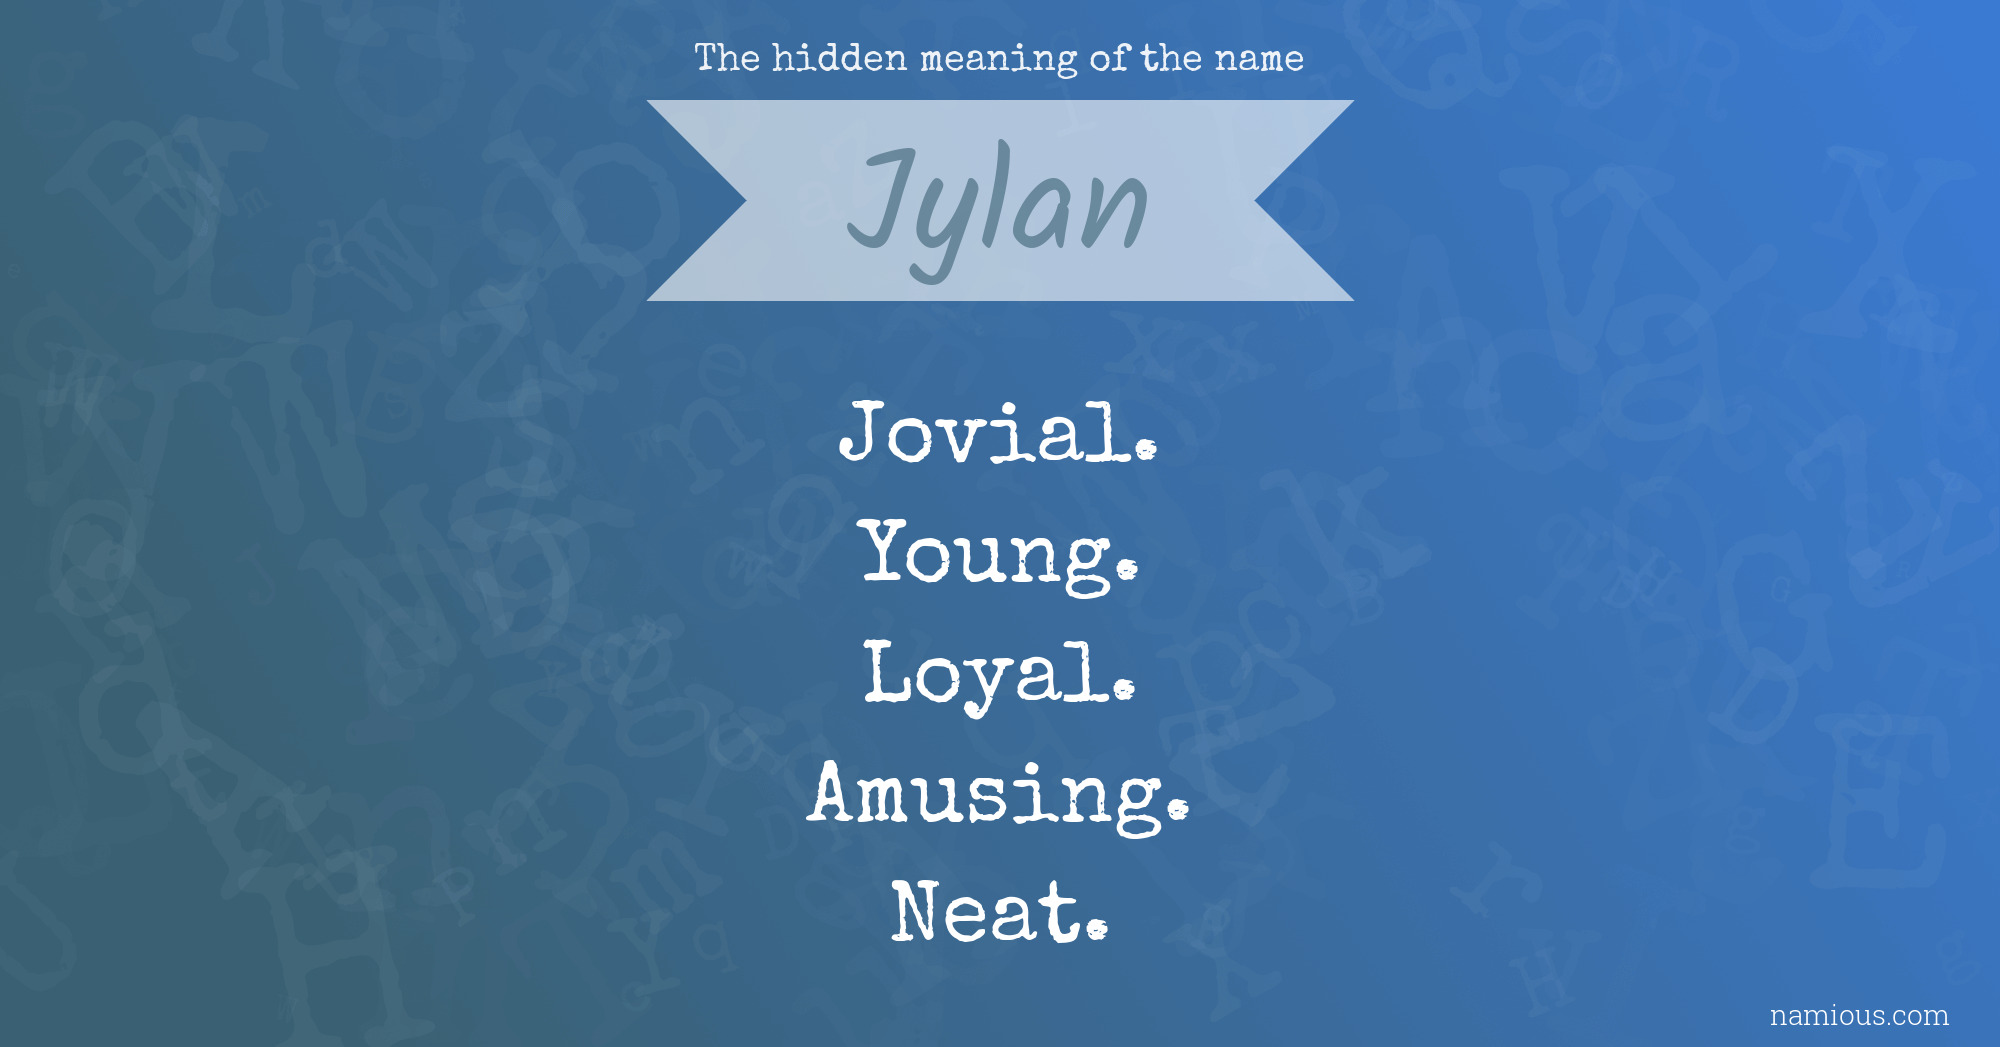 The hidden meaning of the name Jylan